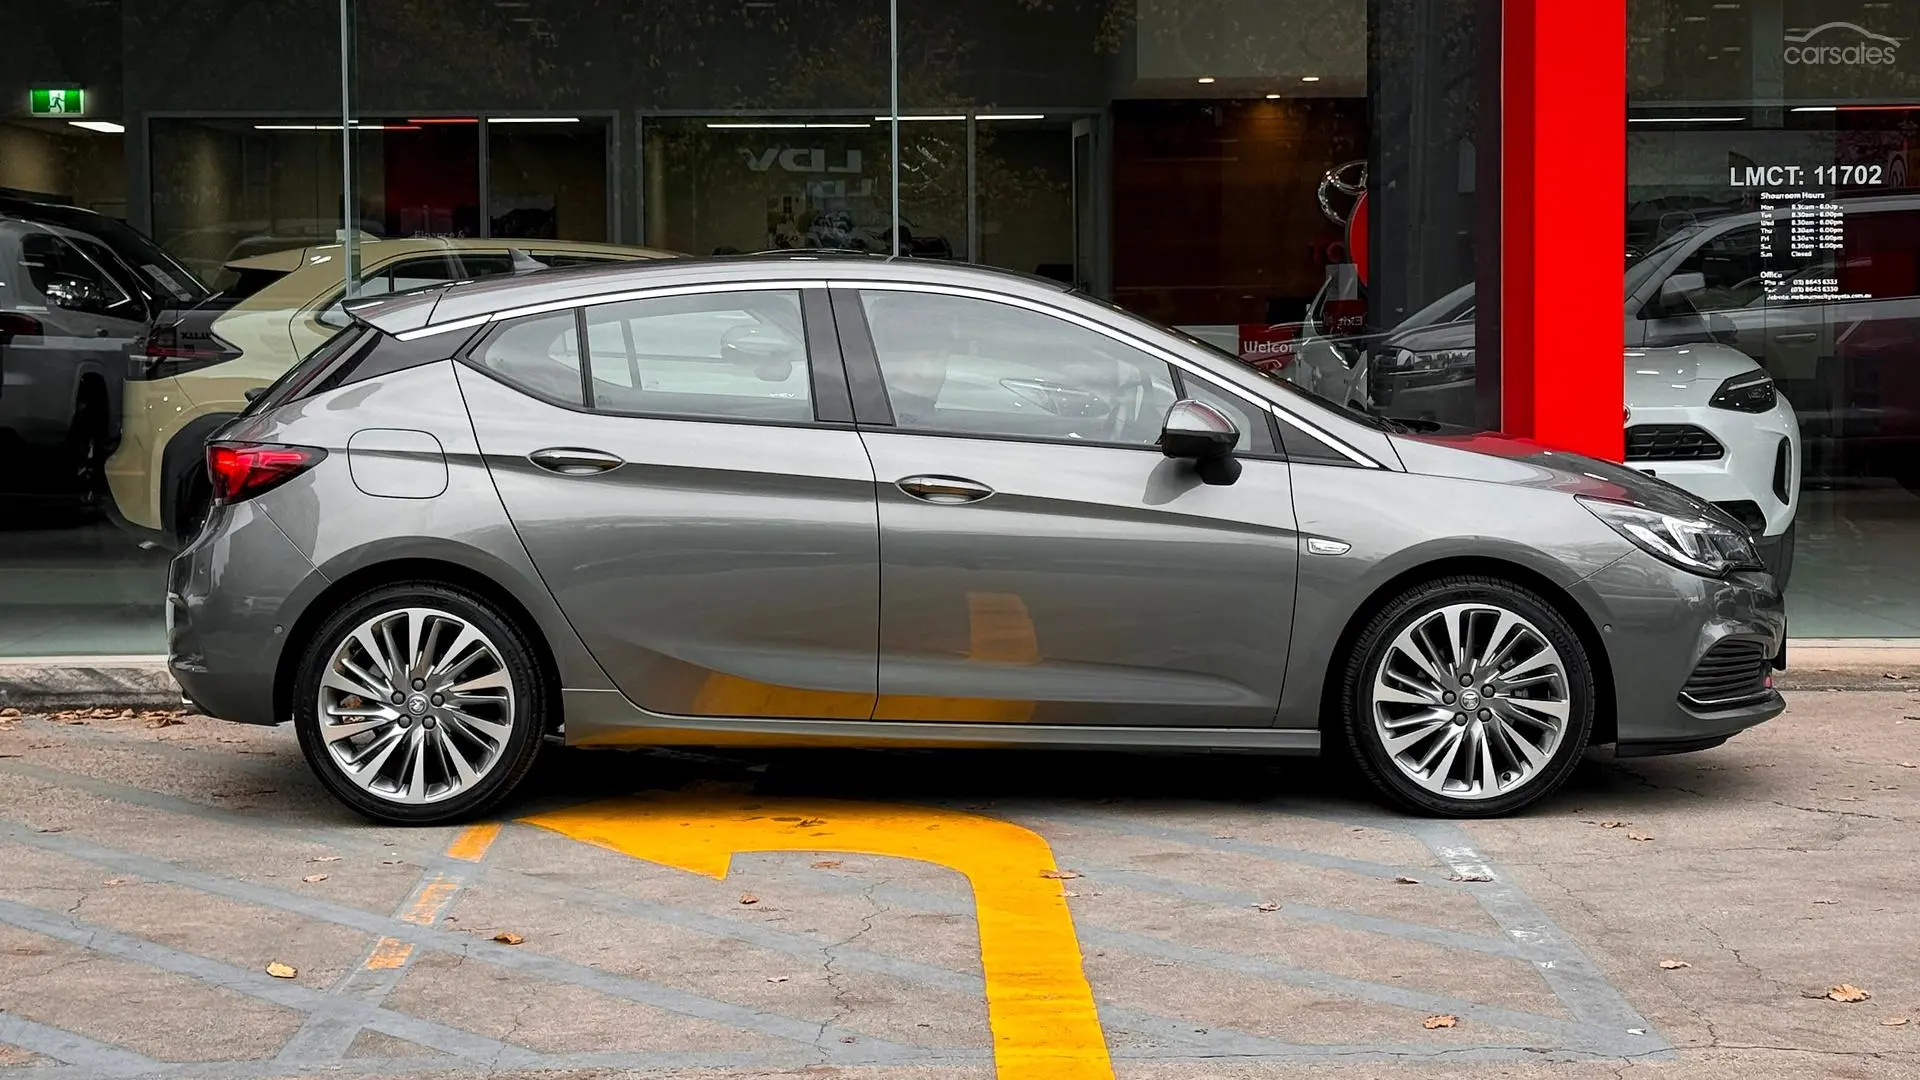 2017 Holden Astra Image 5